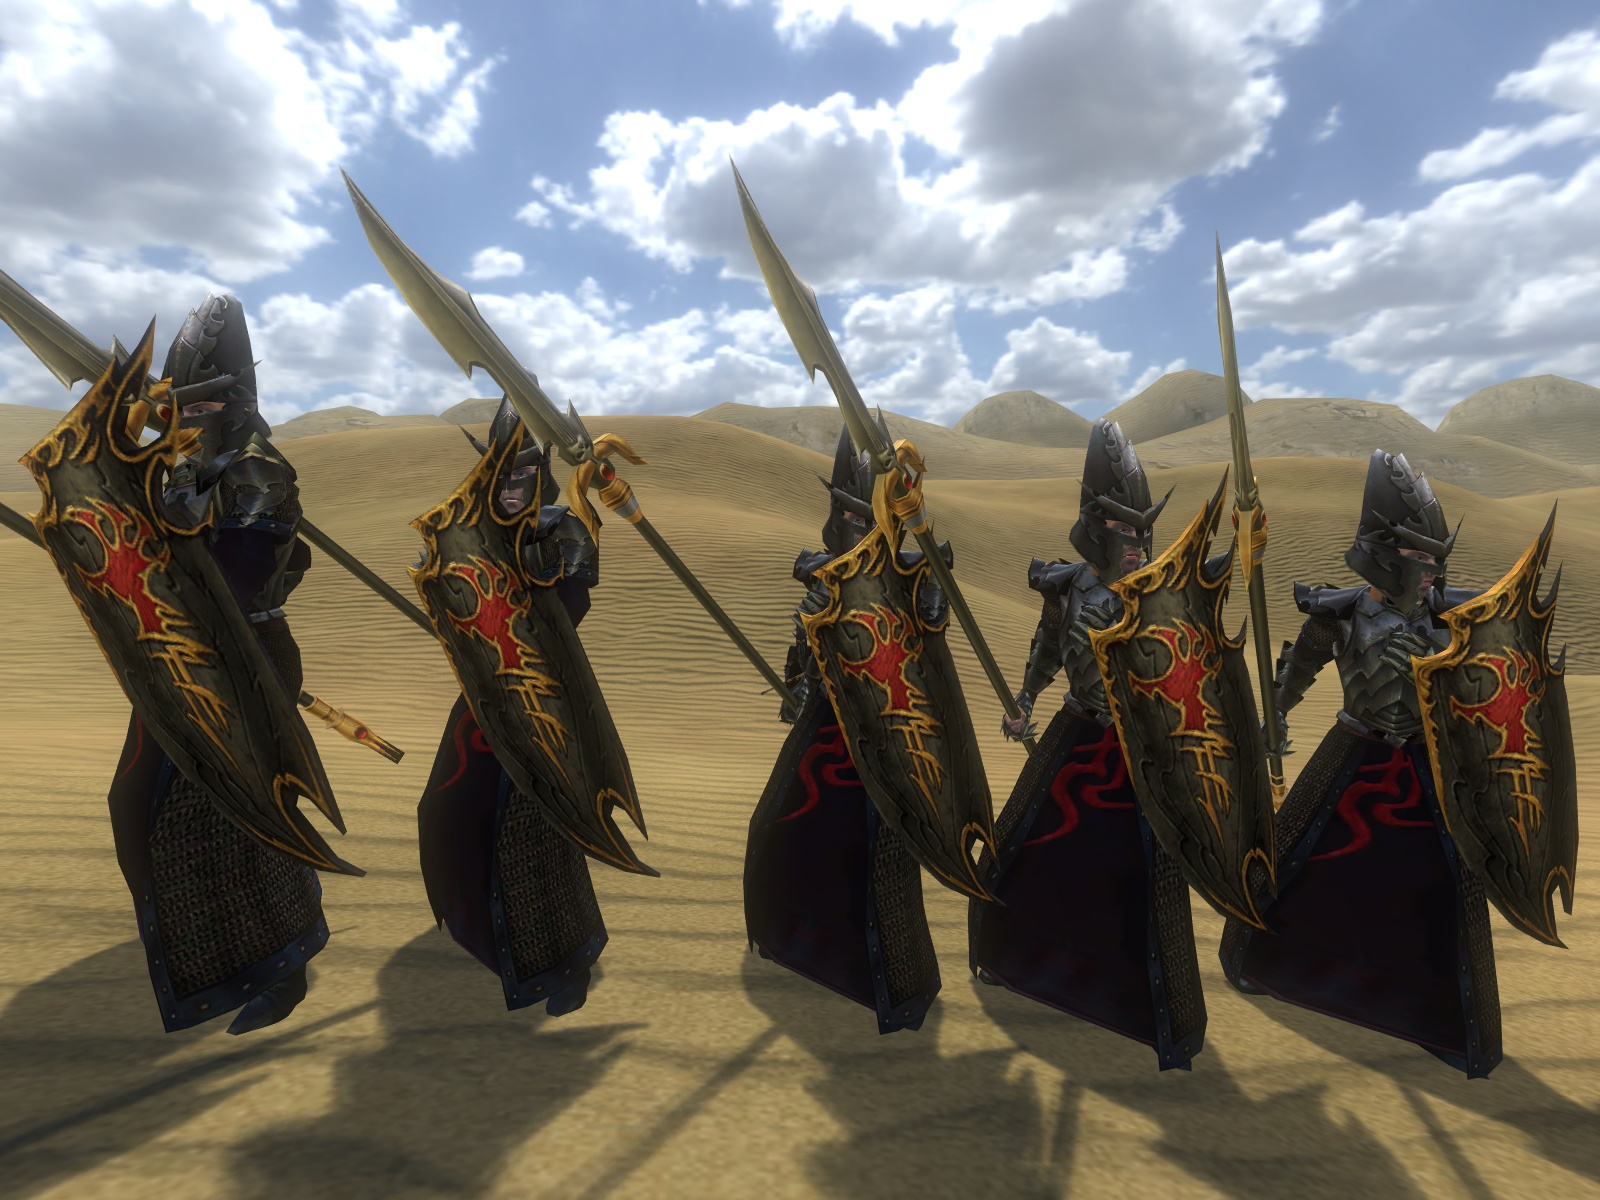 Warband warsword. Warsword Conquest. Mount and Blade Warsword Conquest. Warband Warsword Conquest. Warsword Conquest юниты стража могил.